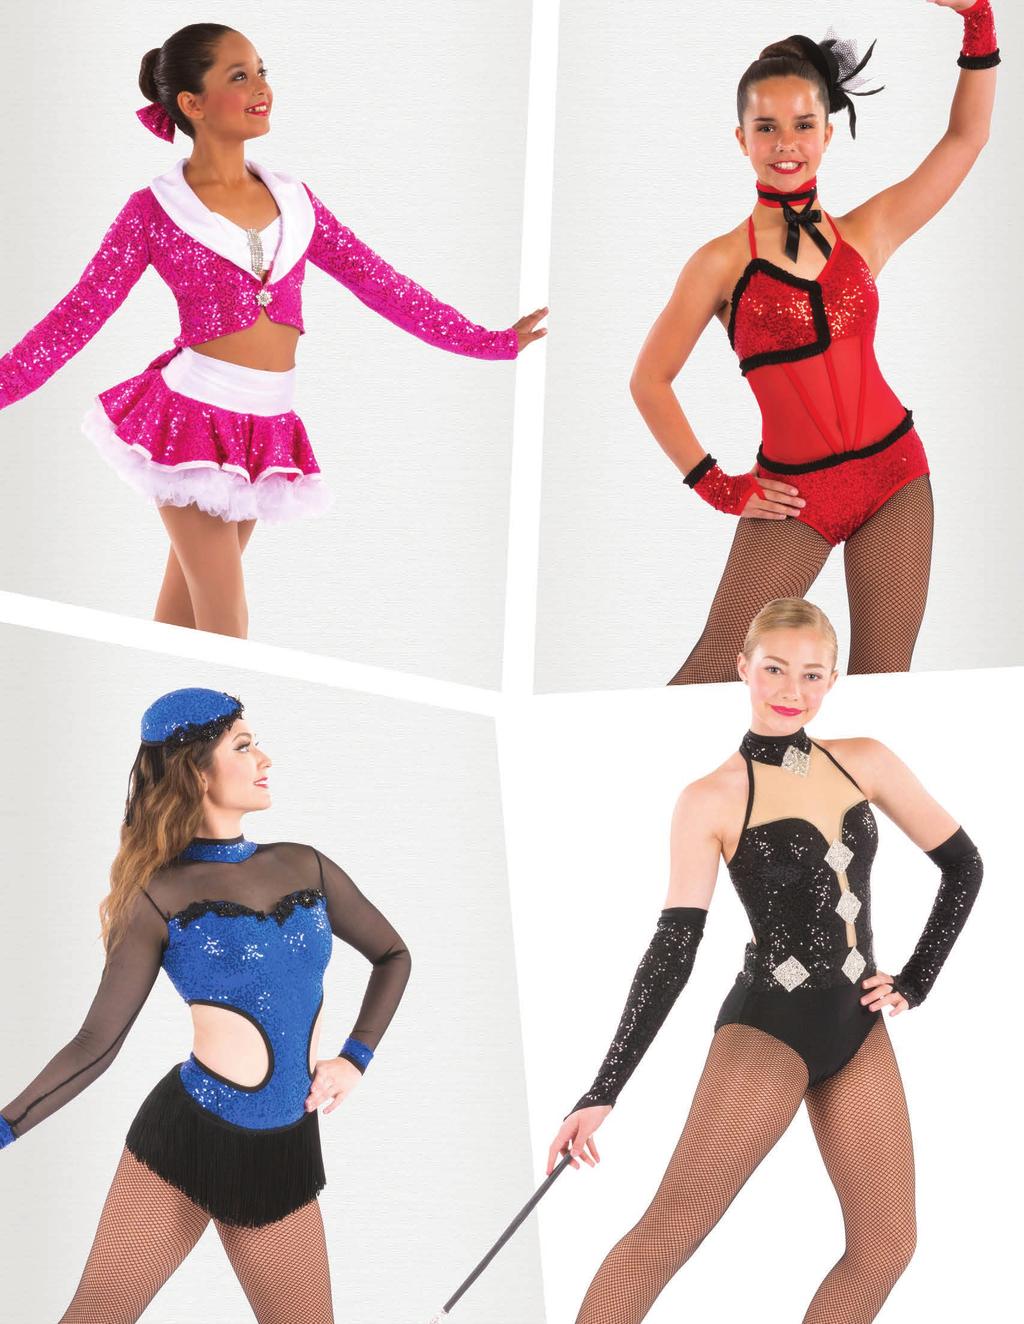 SEQUIN Colors: Red, White, Silver, Hot Pink, Royal, Black 81544 JACKET, TOP, SKIRT, HAIR (OPT) Accent is white or black Shown: Hot Pink/White 81541 LEOTARD, CHOKER, MITTS & HAIR (OPT) Black